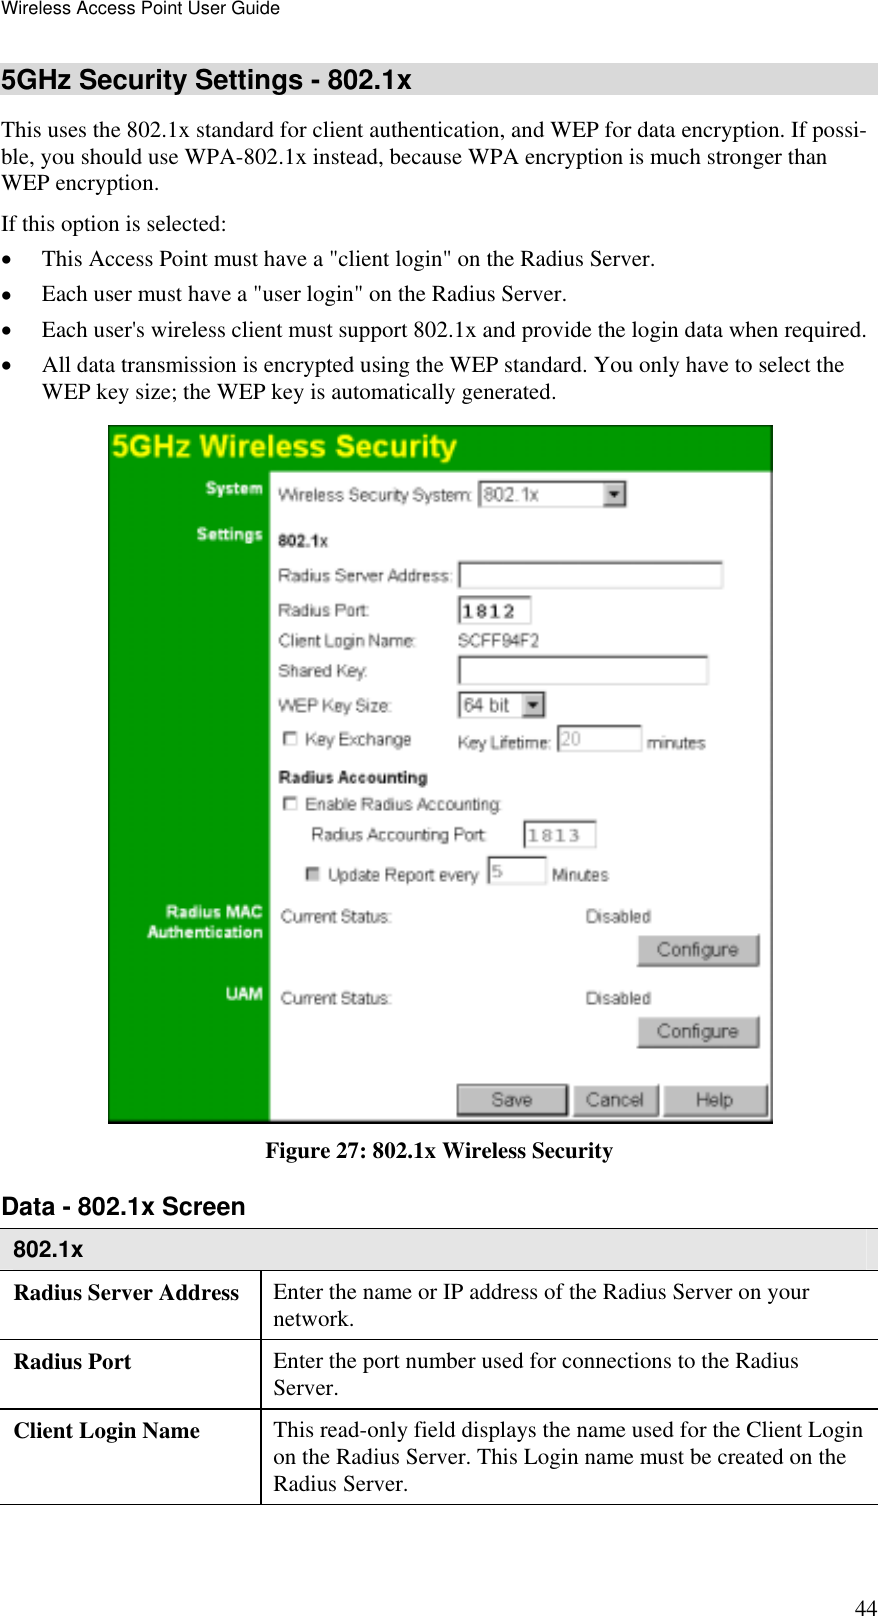 Wireless Access Point User Guide 44 5GHz Security Settings - 802.1x This uses the 802.1x standard for client authentication, and WEP for data encryption. If possi-ble, you should use WPA-802.1x instead, because WPA encryption is much stronger than WEP encryption.  If this option is selected: •  This Access Point must have a &quot;client login&quot; on the Radius Server.  •  Each user must have a &quot;user login&quot; on the Radius Server.  •  Each user&apos;s wireless client must support 802.1x and provide the login data when required.  •  All data transmission is encrypted using the WEP standard. You only have to select the WEP key size; the WEP key is automatically generated.  Figure 27: 802.1x Wireless Security Data - 802.1x Screen  802.1x Radius Server Address  Enter the name or IP address of the Radius Server on your network. Radius Port  Enter the port number used for connections to the Radius Server. Client Login Name  This read-only field displays the name used for the Client Login on the Radius Server. This Login name must be created on the Radius Server. 